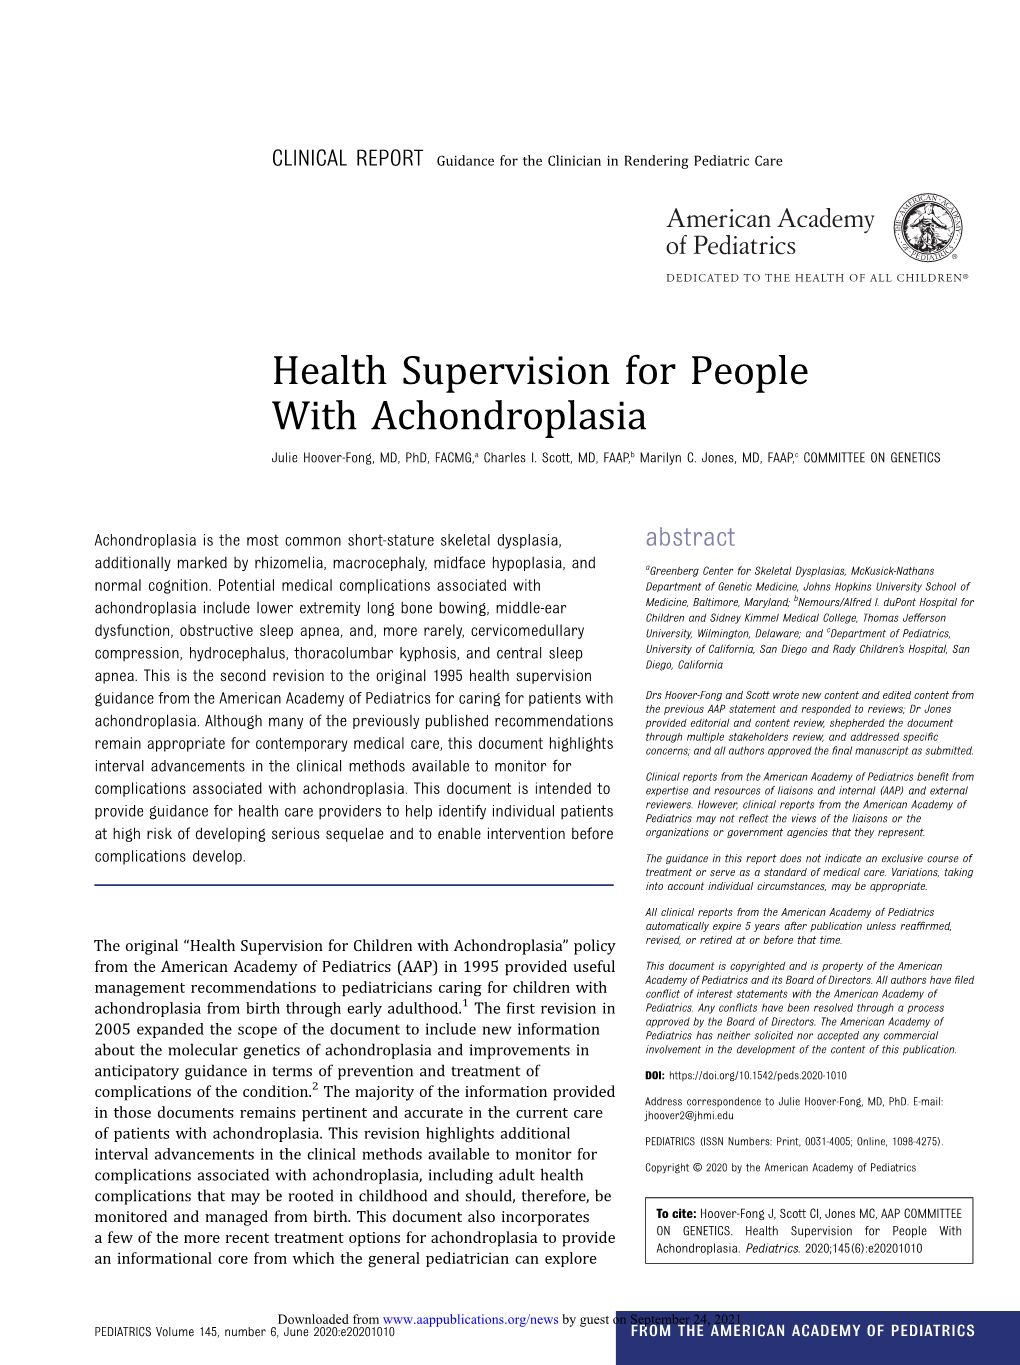 Health Supervision for People with Achondroplasia Julie Hoover-Fong, MD, Phd, FACMG,A Charles I